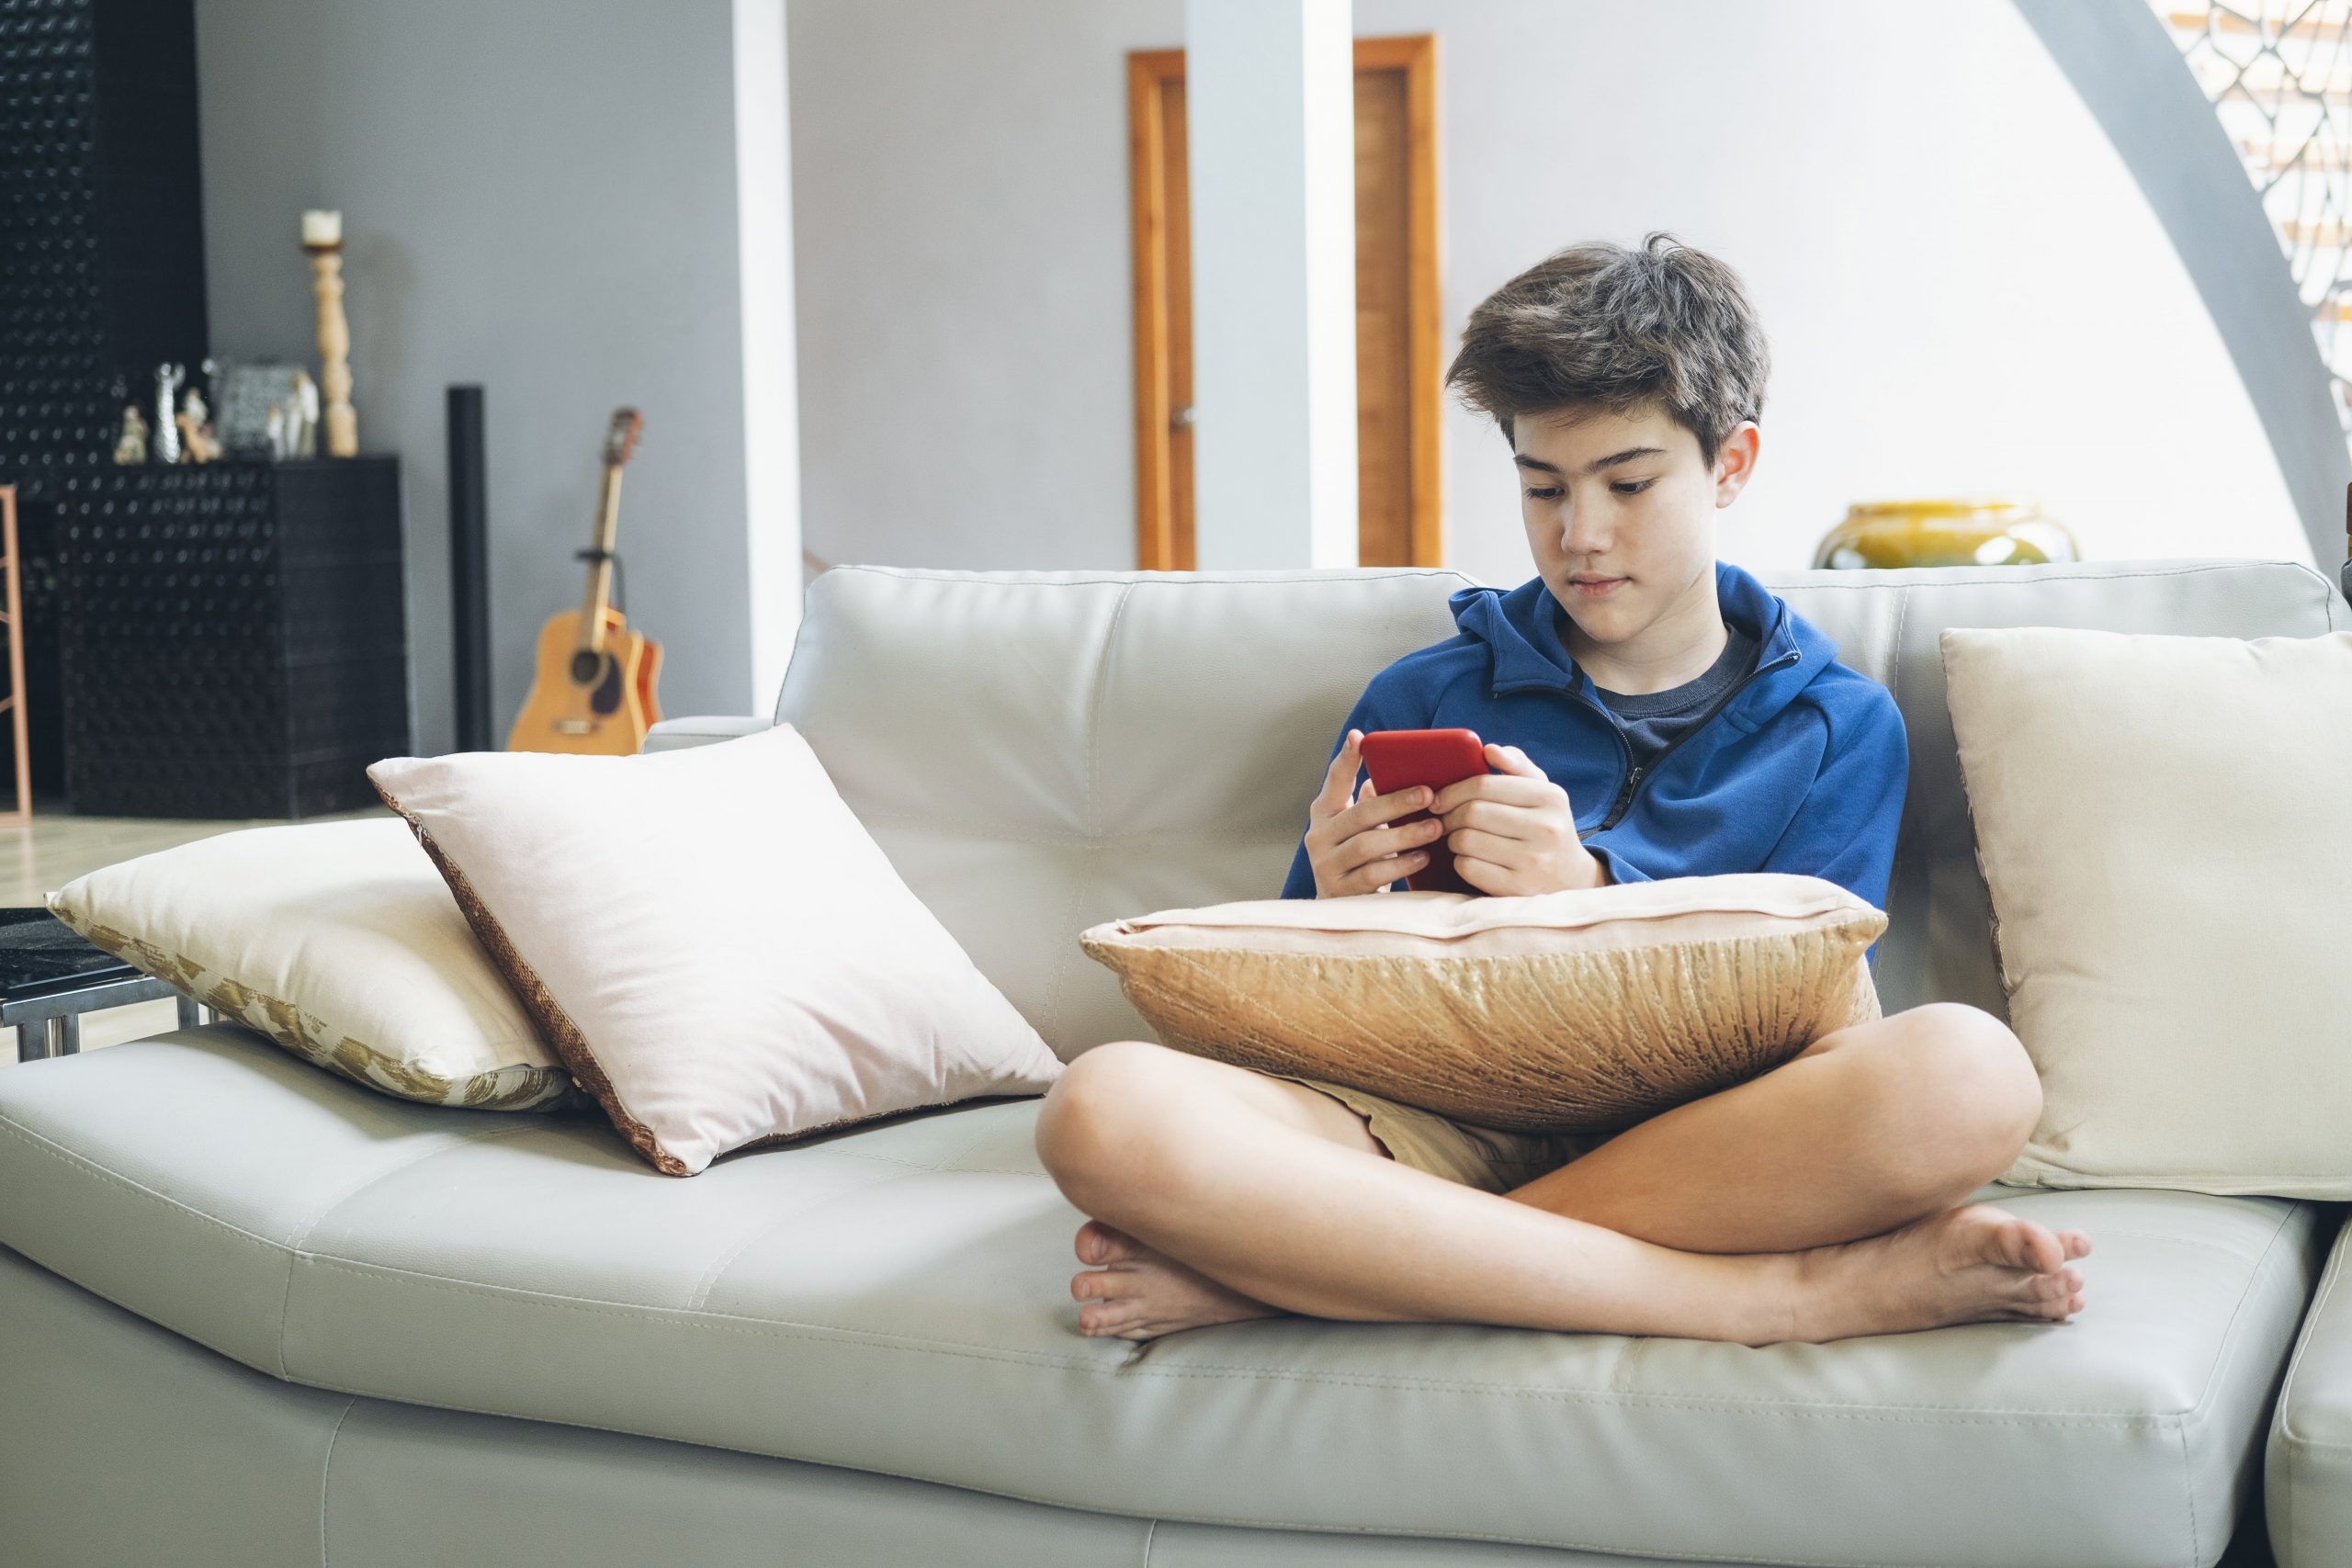 How does Online Gaming Benefit Children?